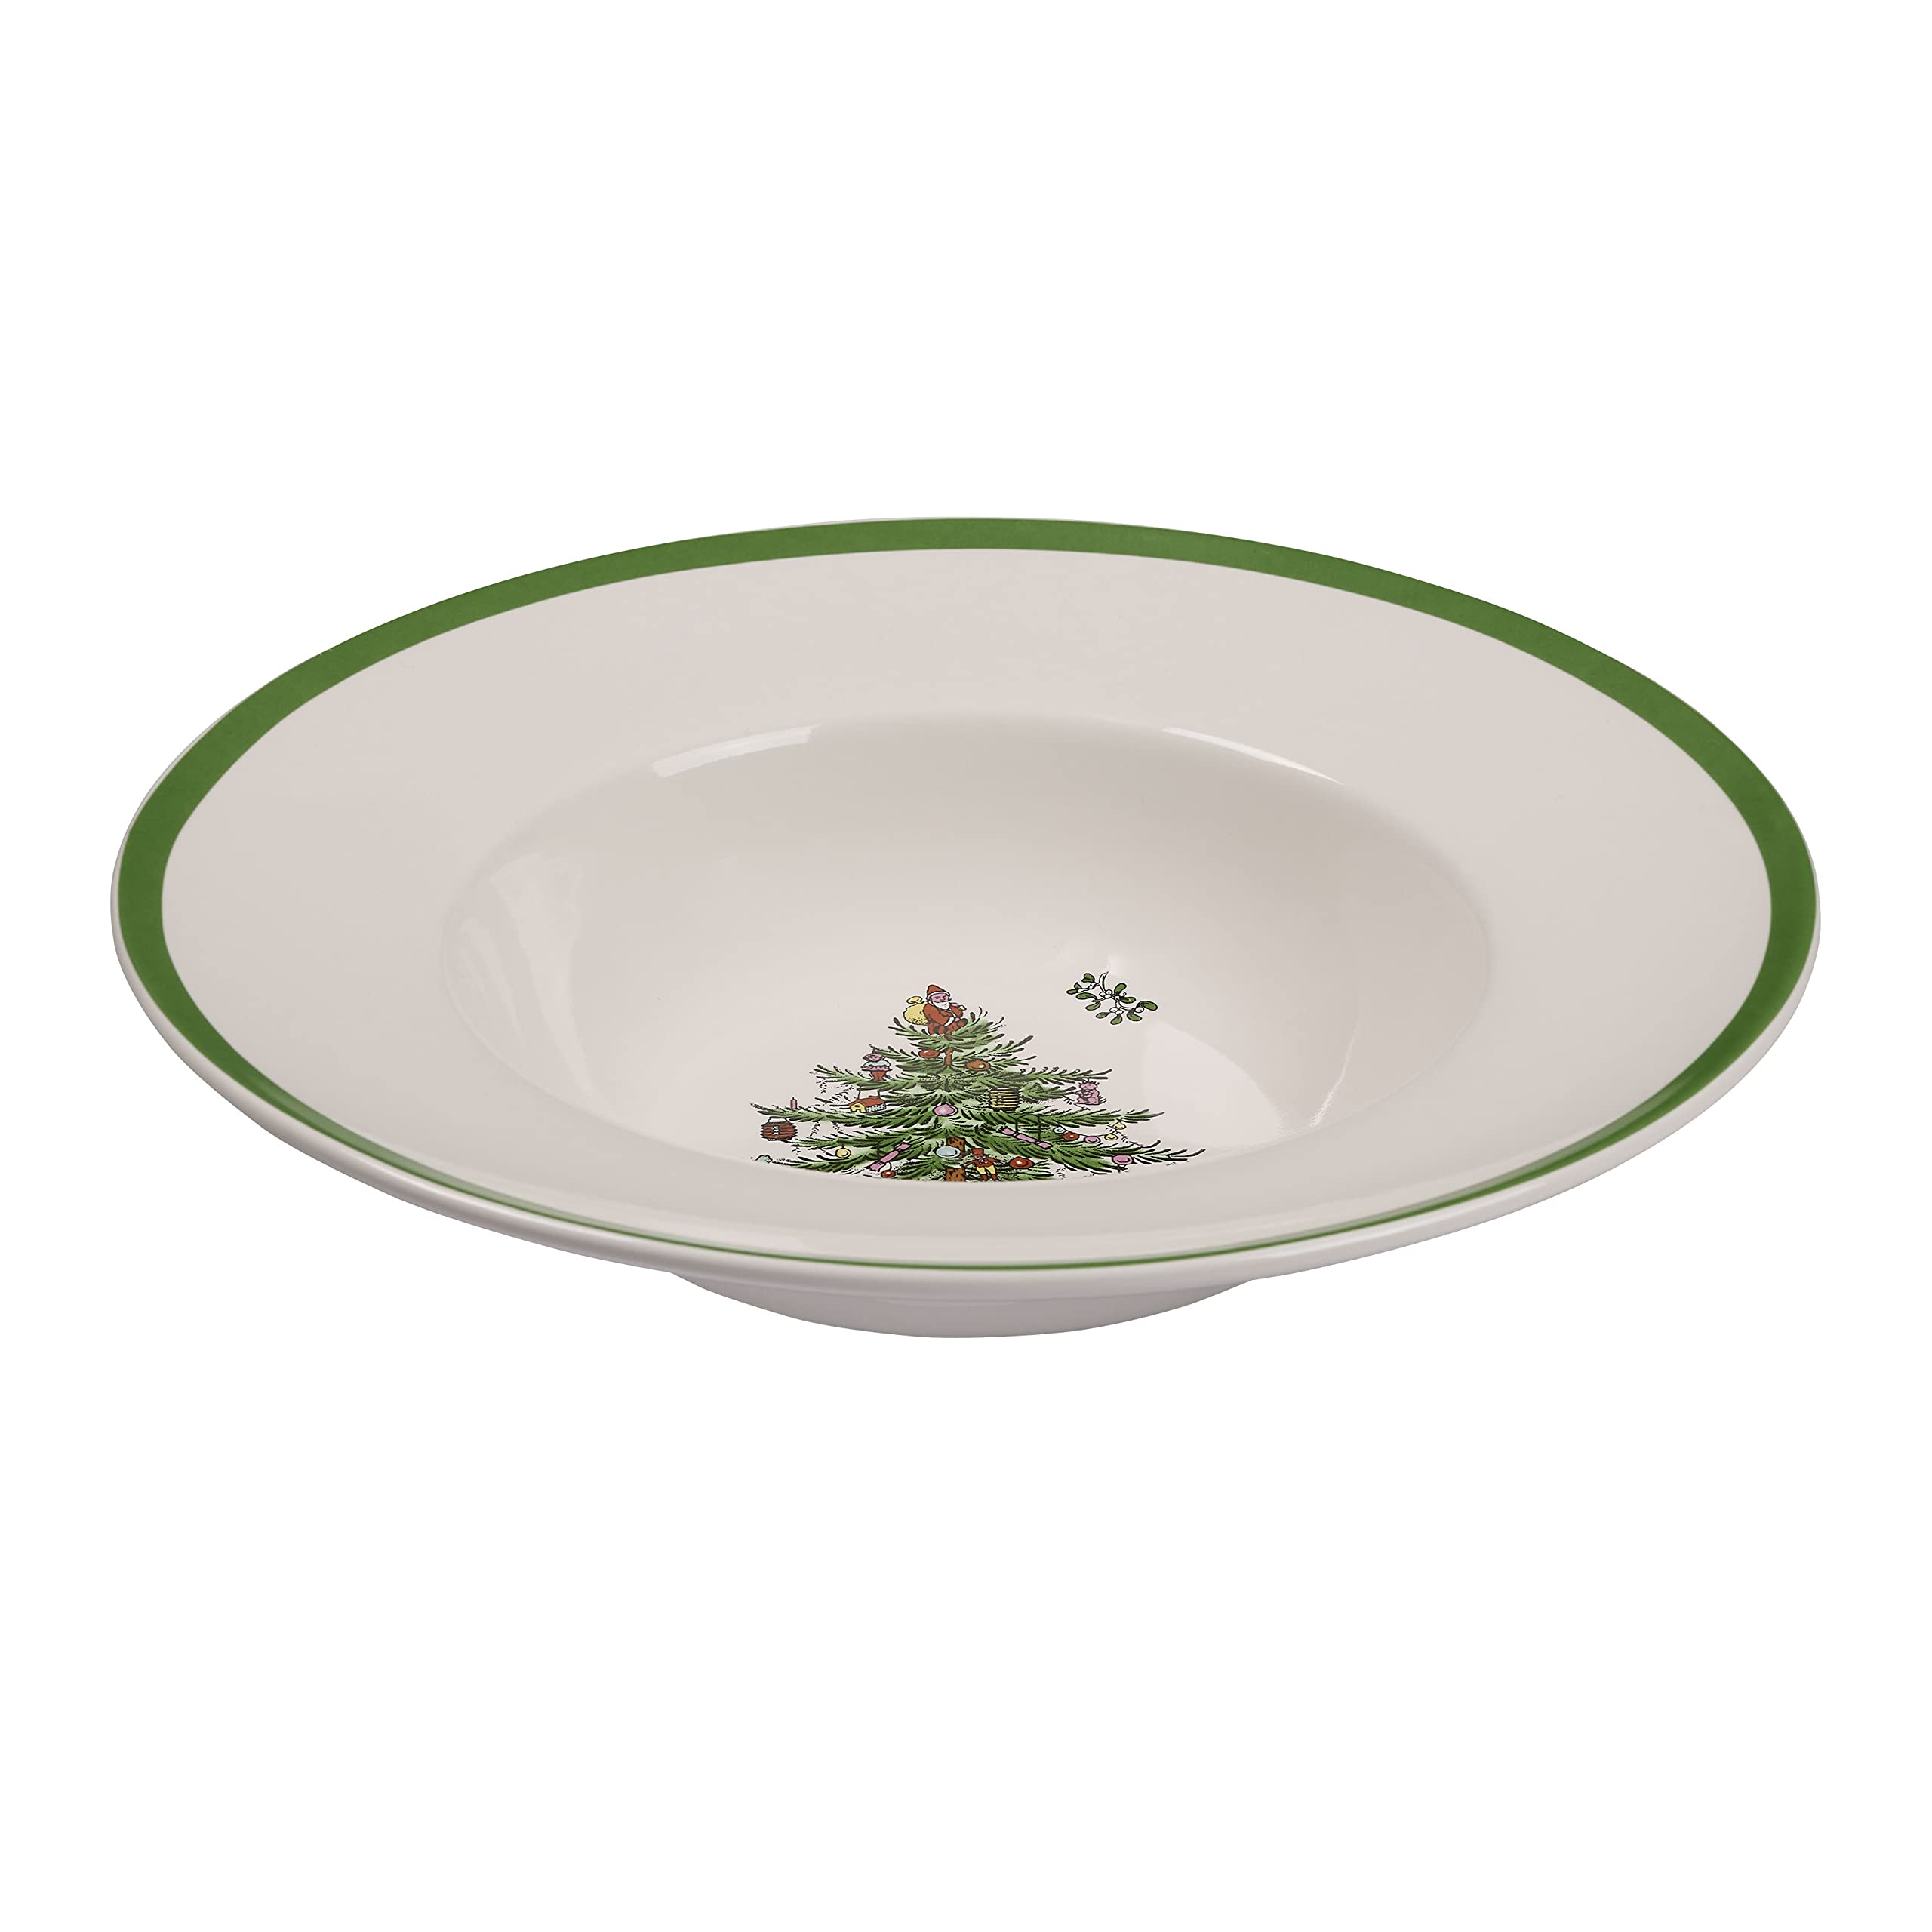 Spode - christmas Tree collection - 10 Pasta Bowl - Made of Porcelain- Rimmed Plate for Serving Salad, Spaghetti, and Soup- Dish